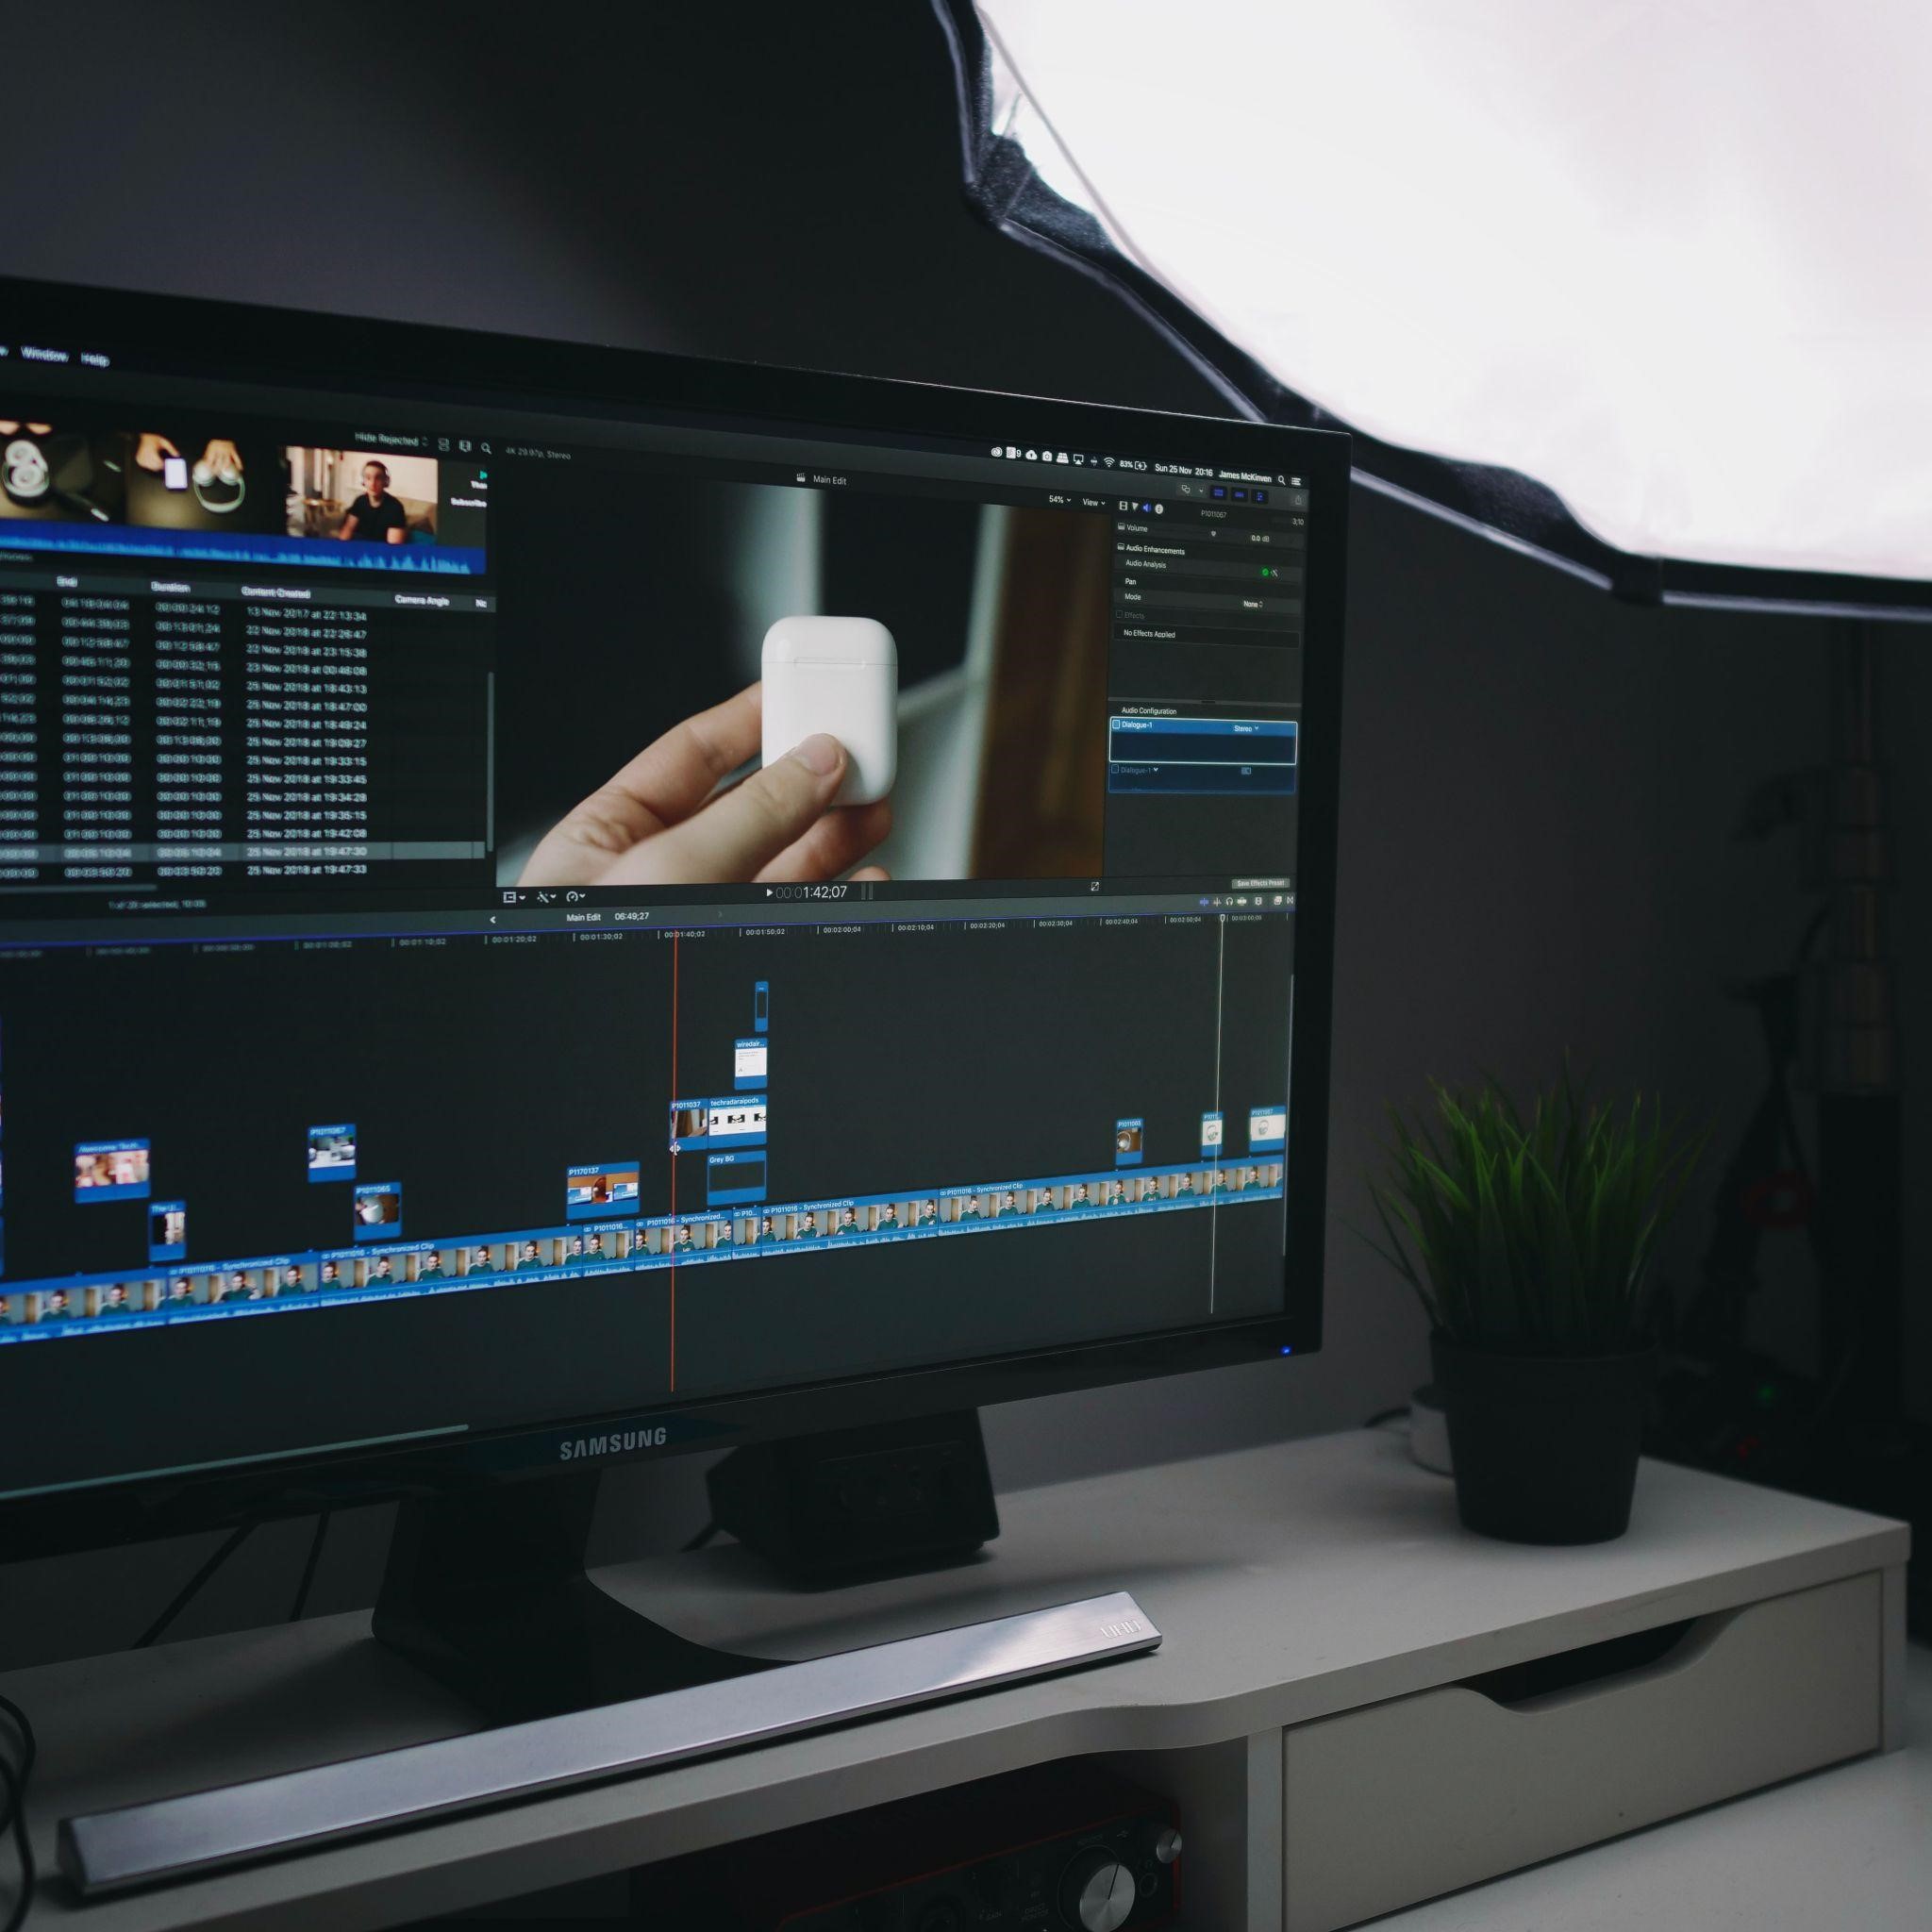 7 Video Editing Tools from Beginner to Advanced Level